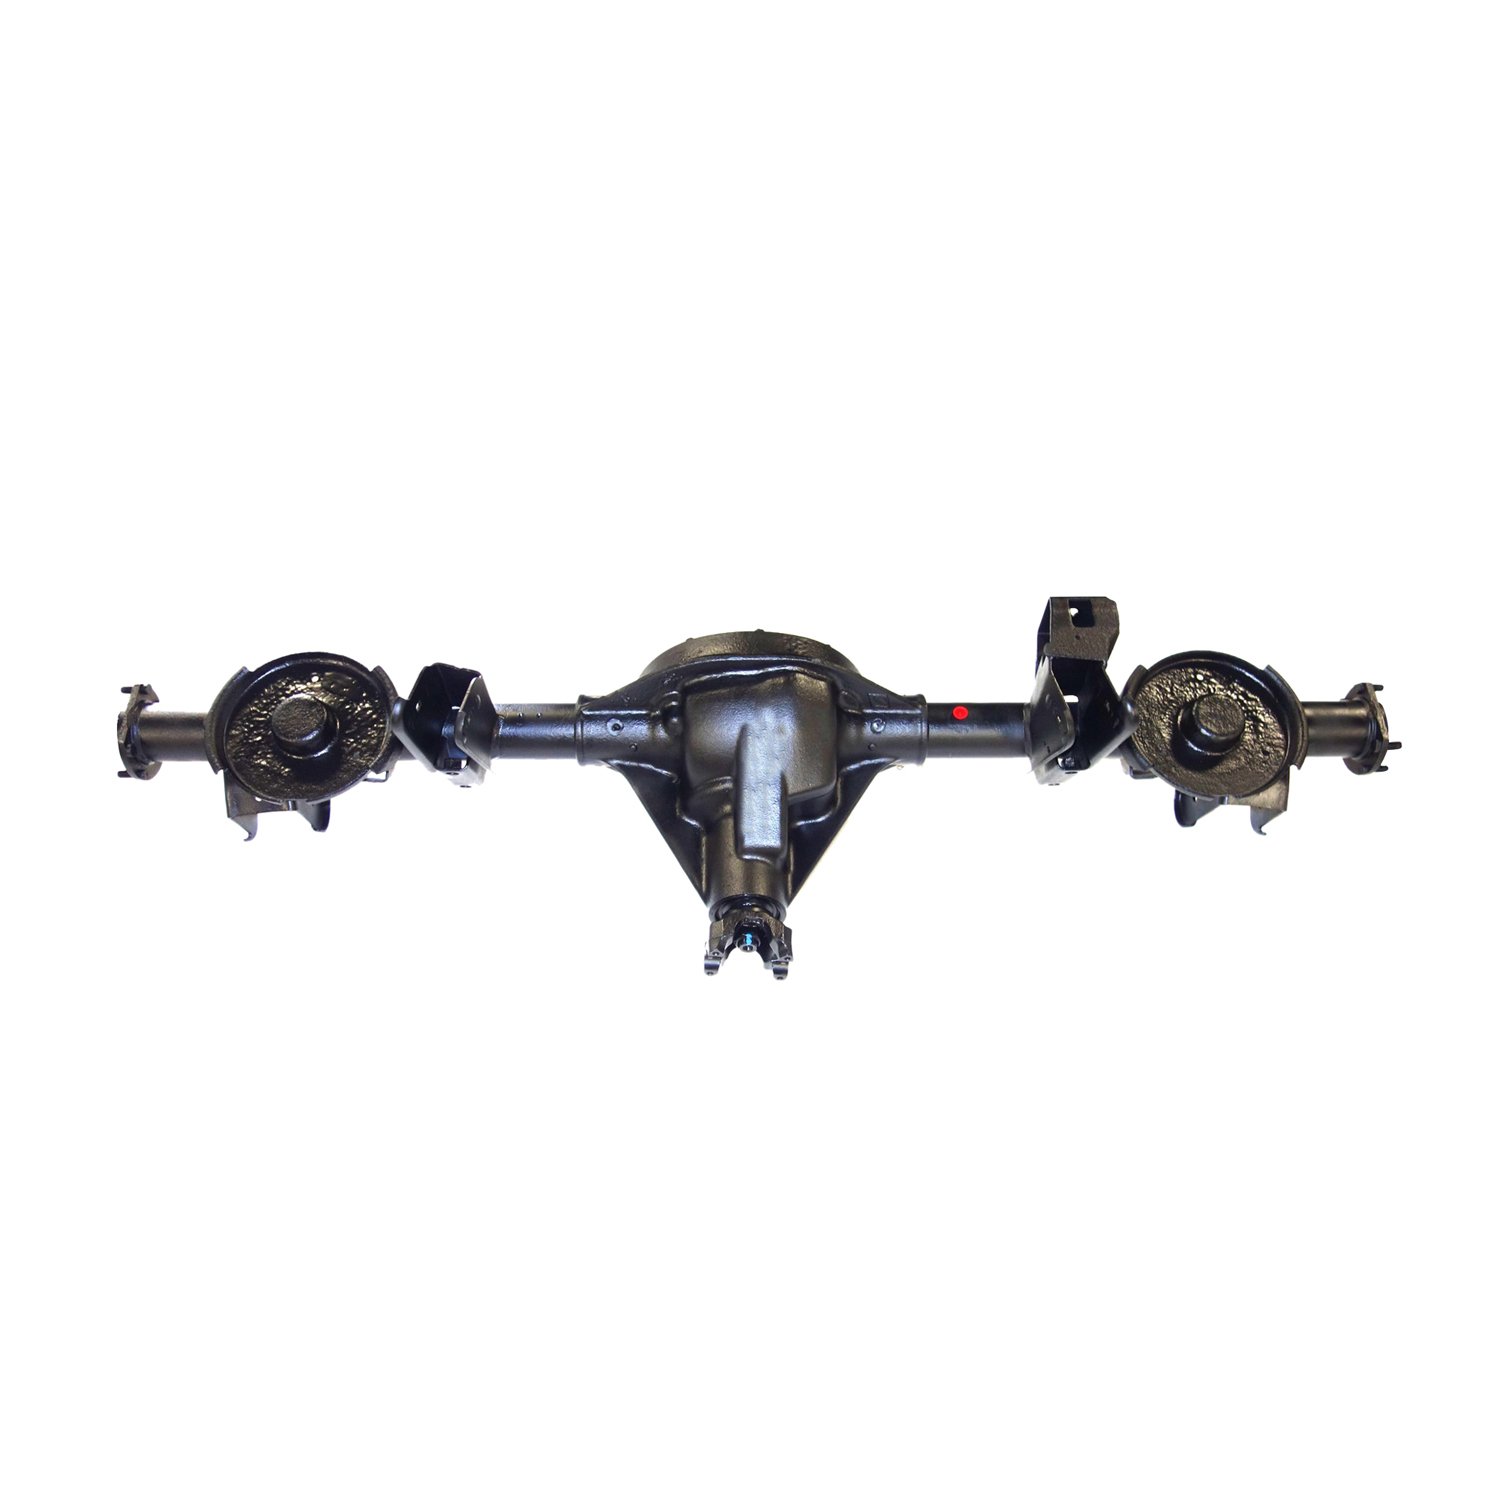 Remanufactured Complete Axle Assy for Dana 35 2002